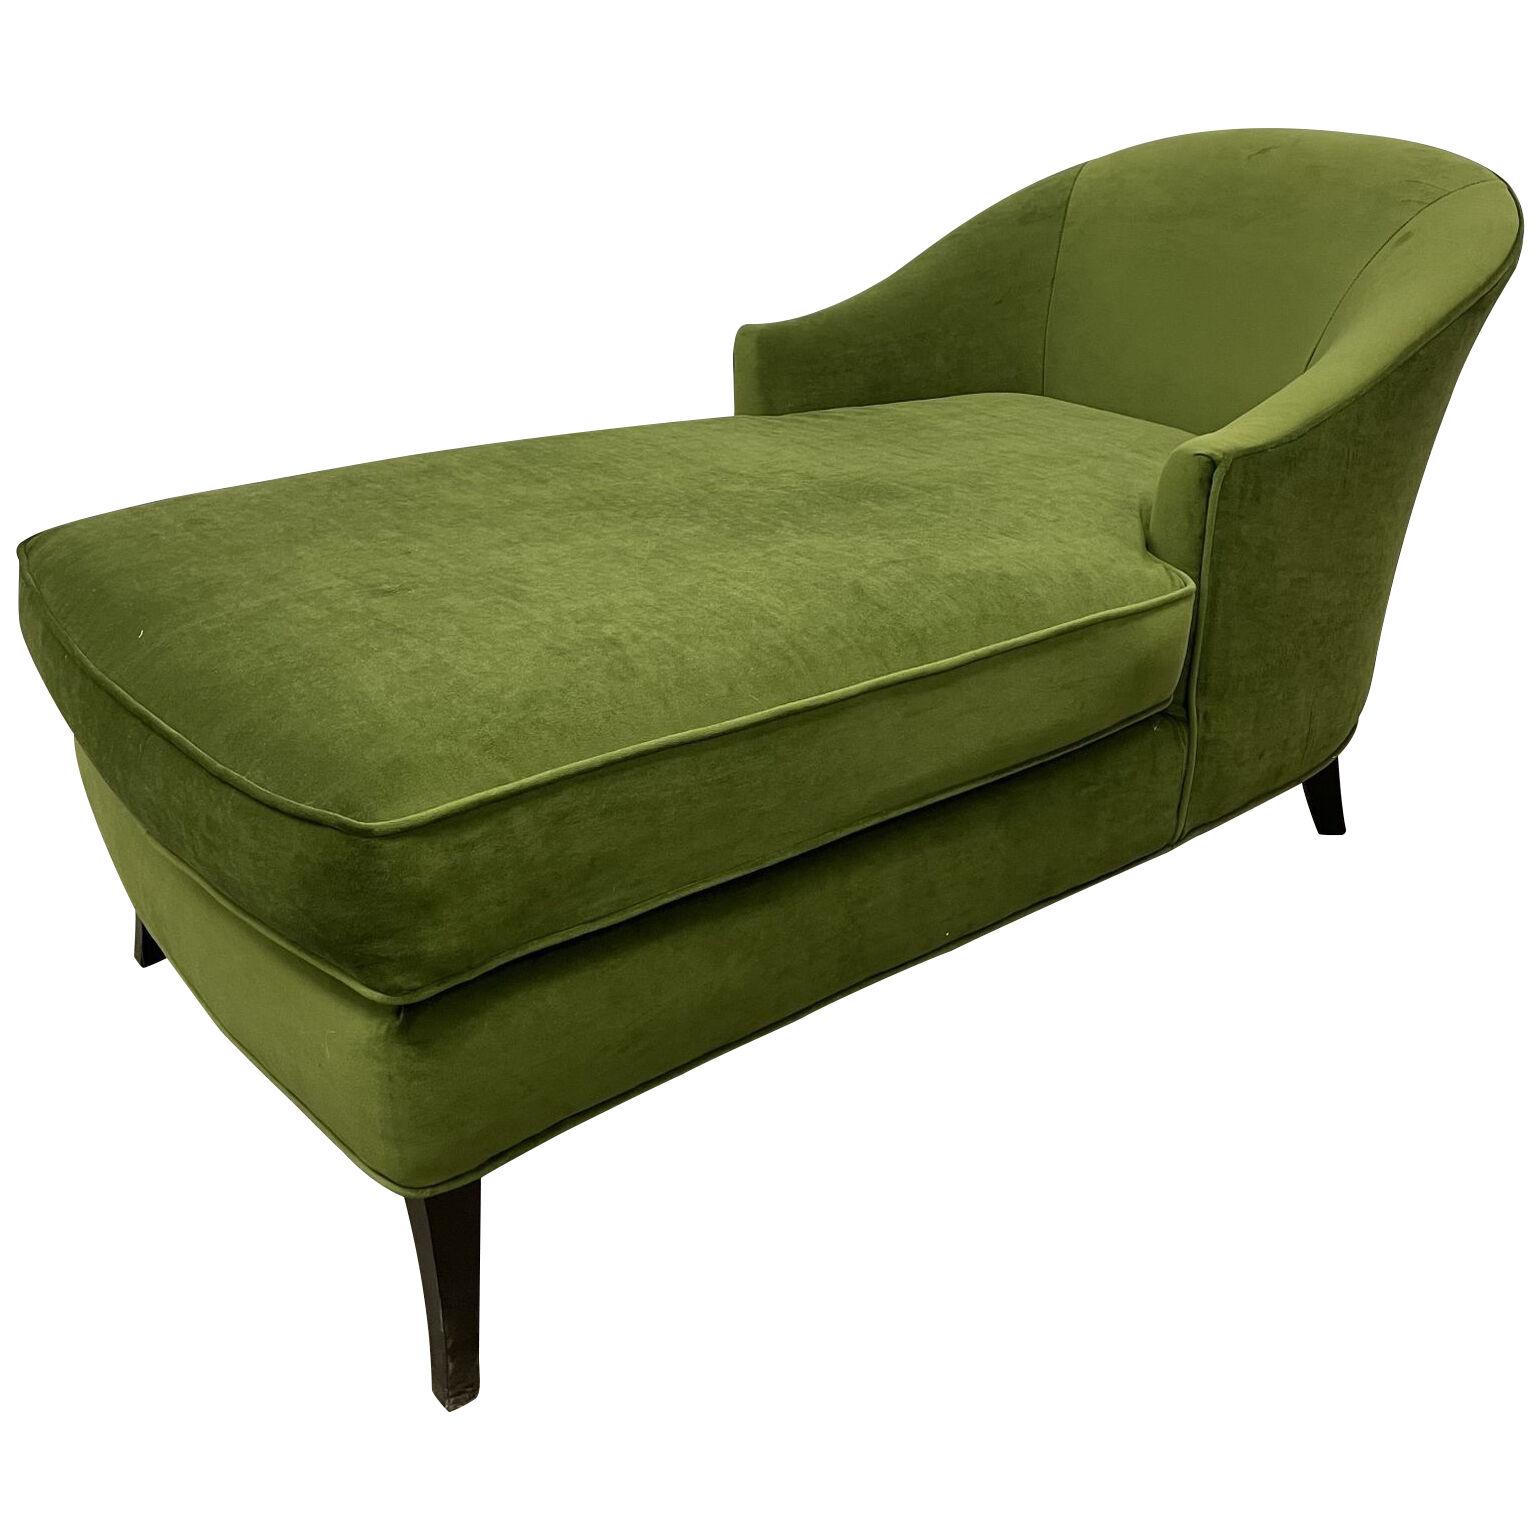 Mid-Century Modern Style American Designer Chaise / Daybed / Lounge, Green